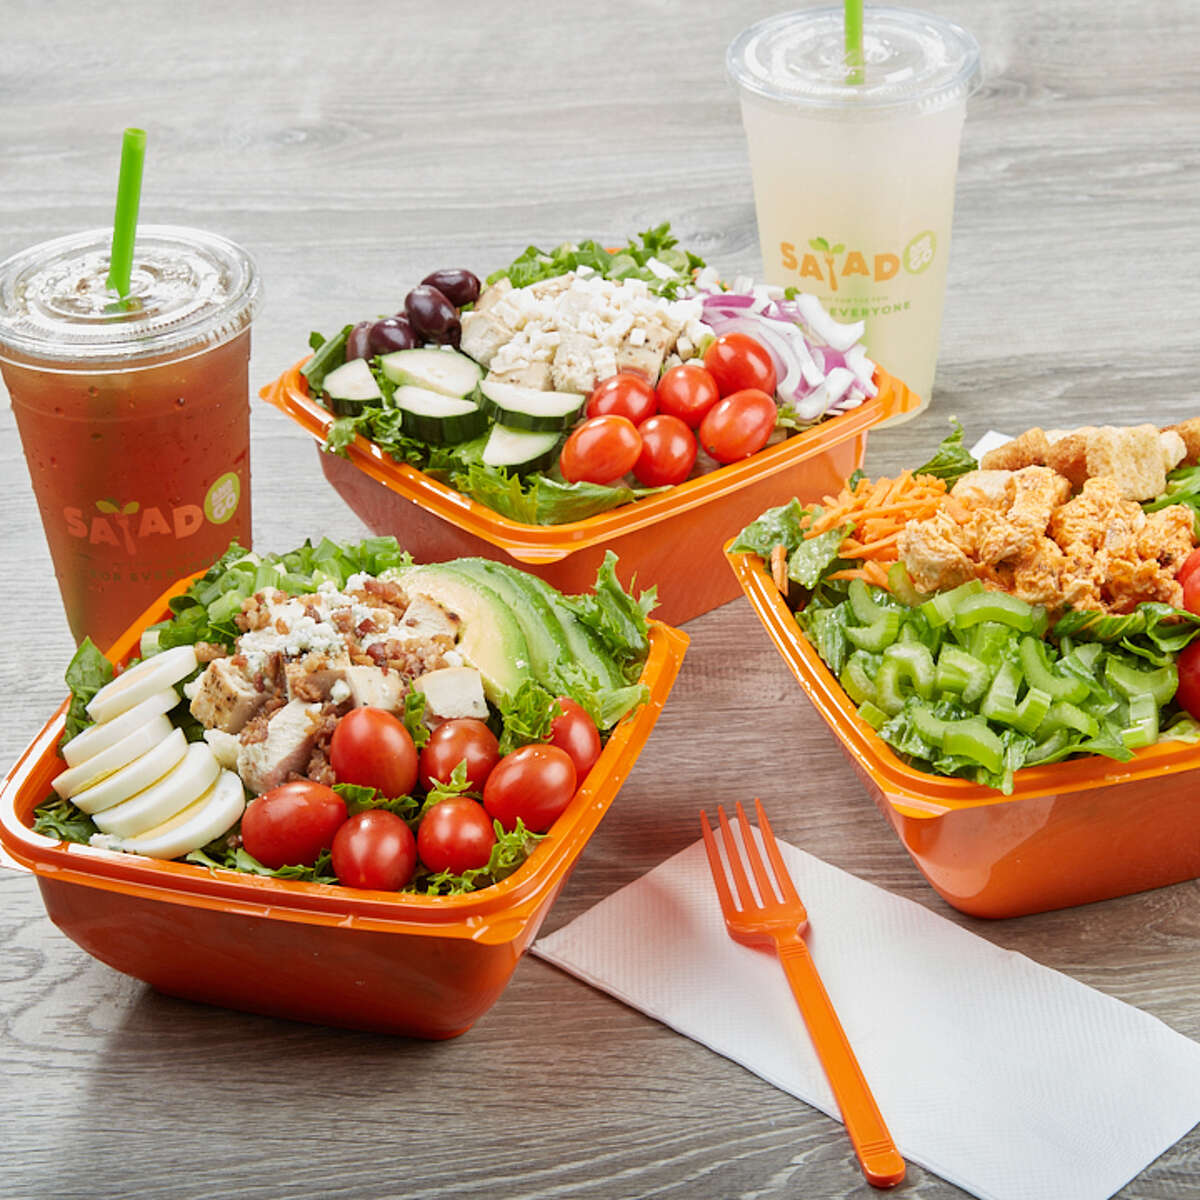 Salad and Go's Cobb Buffalo Chicken is one of the many bowls you can order on the go.